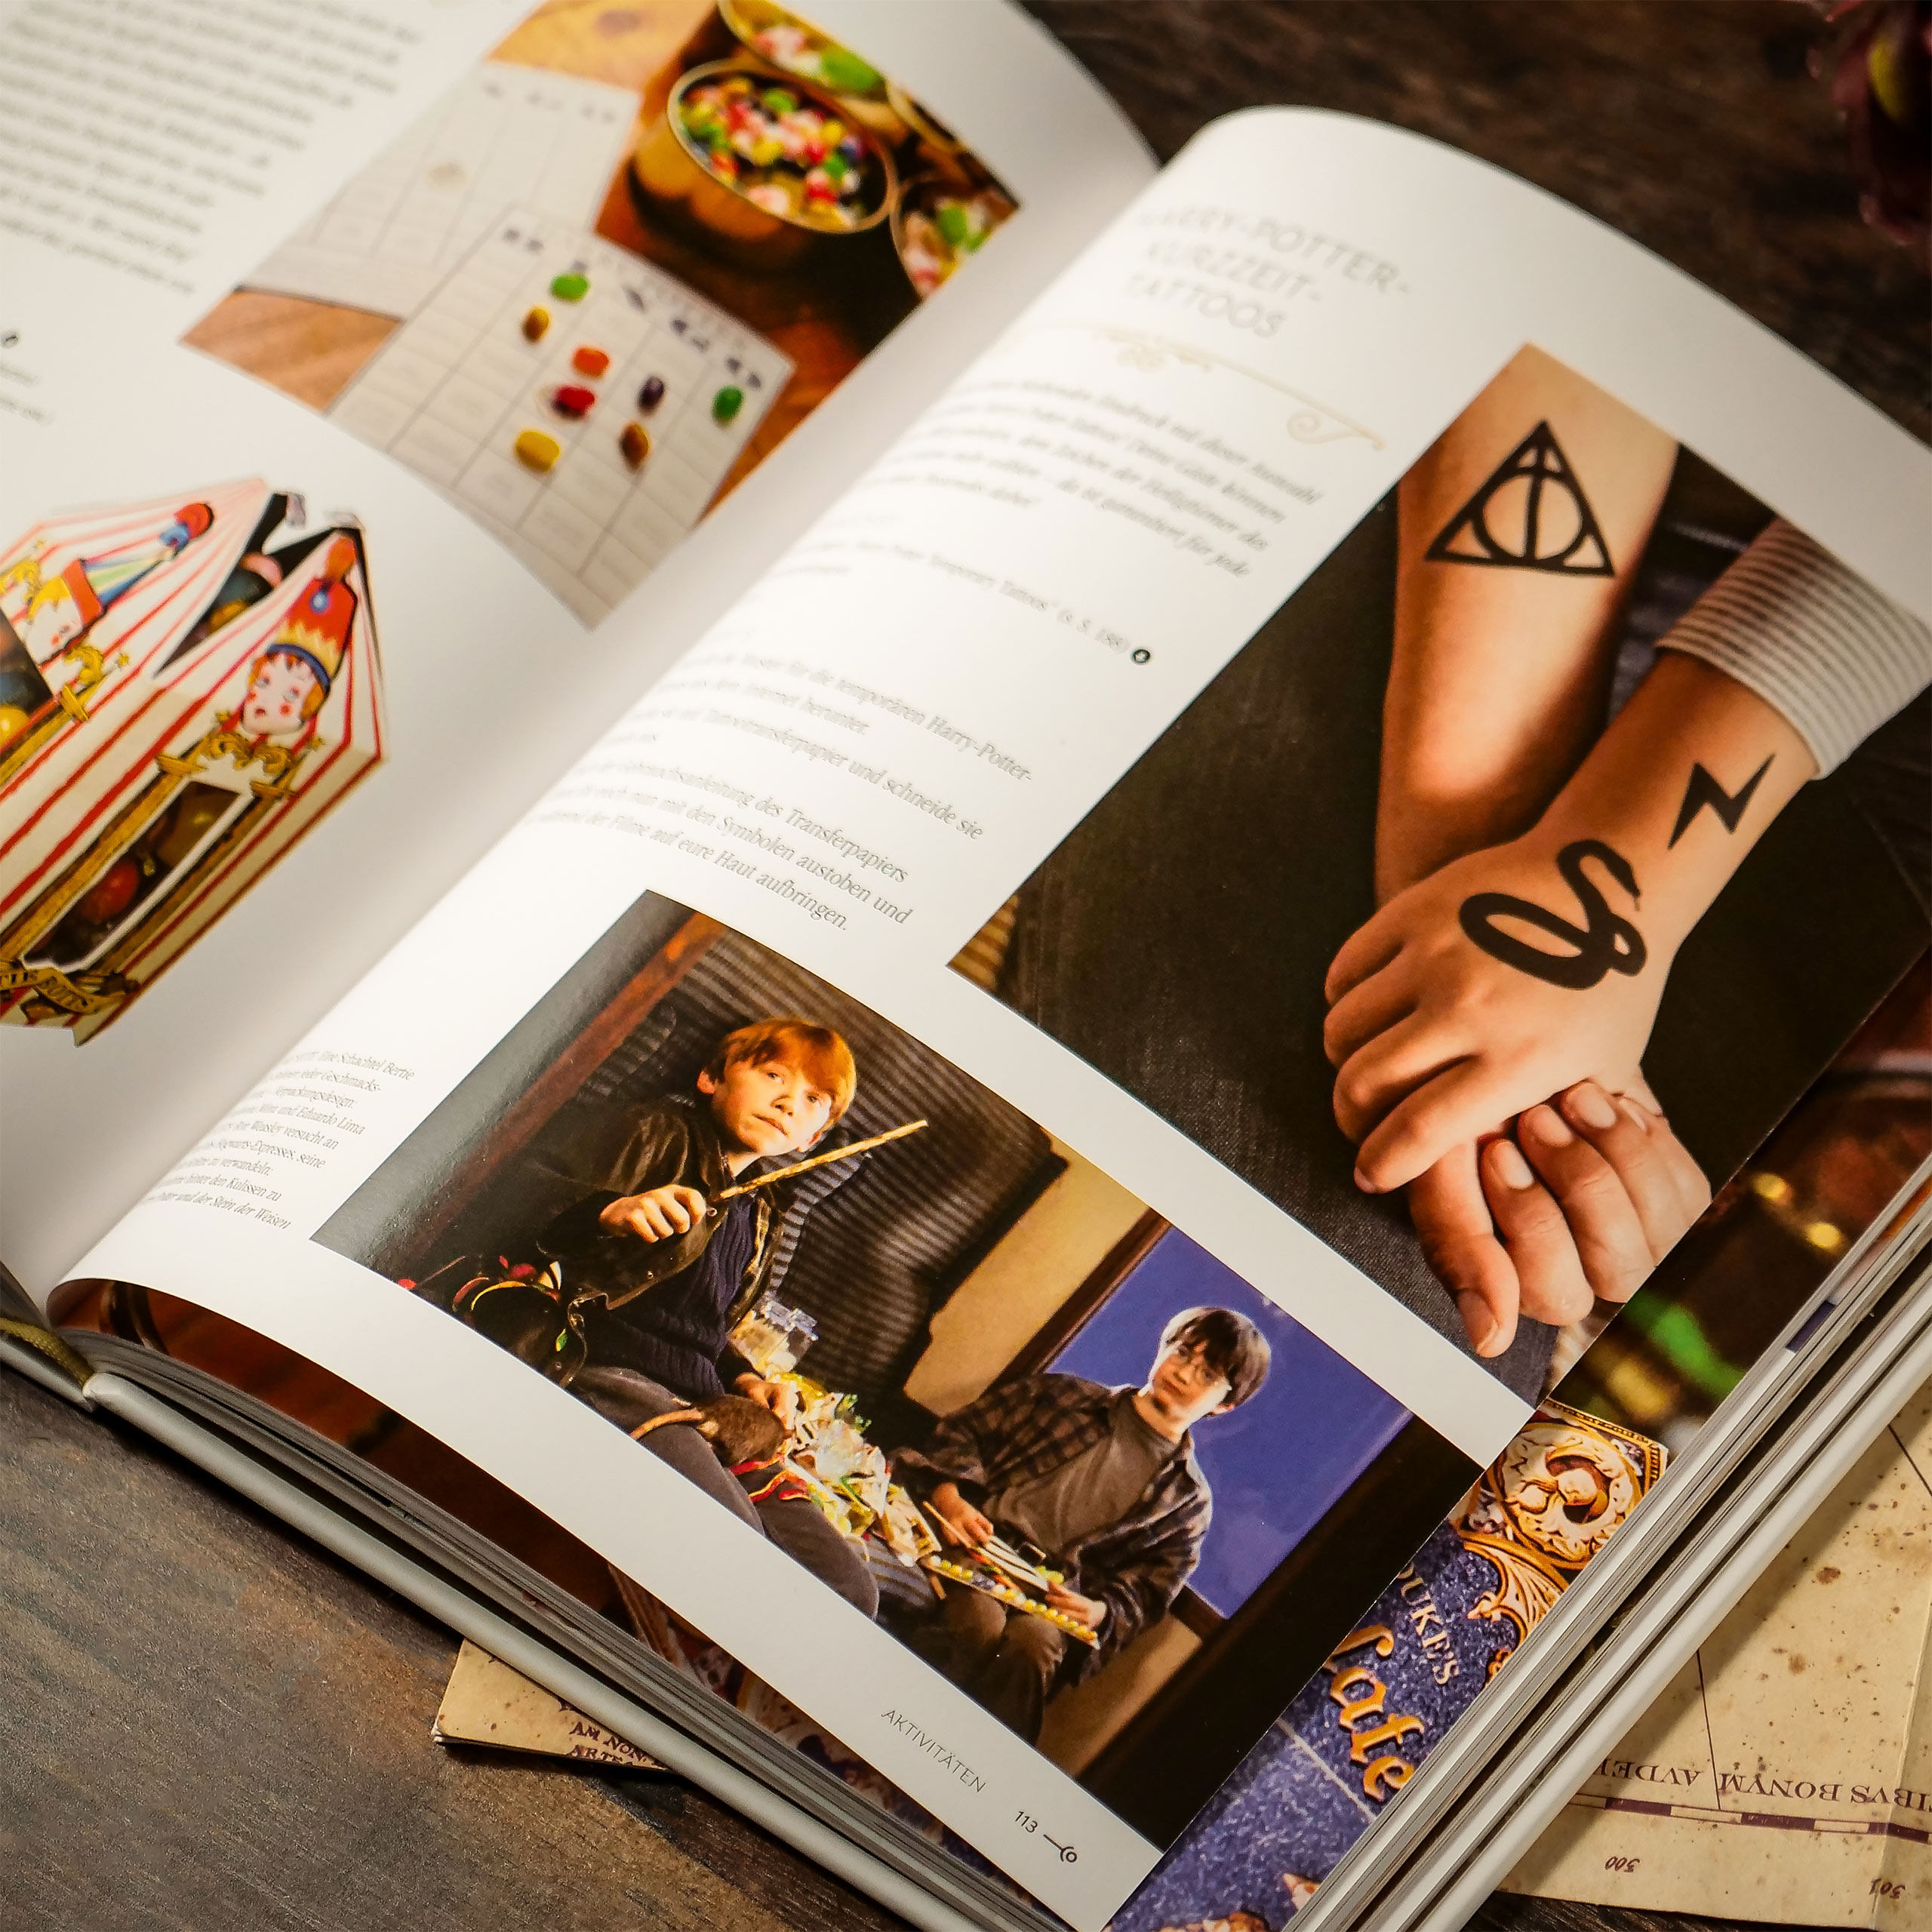 Harry Potter - The Official Cooking and Baking Book